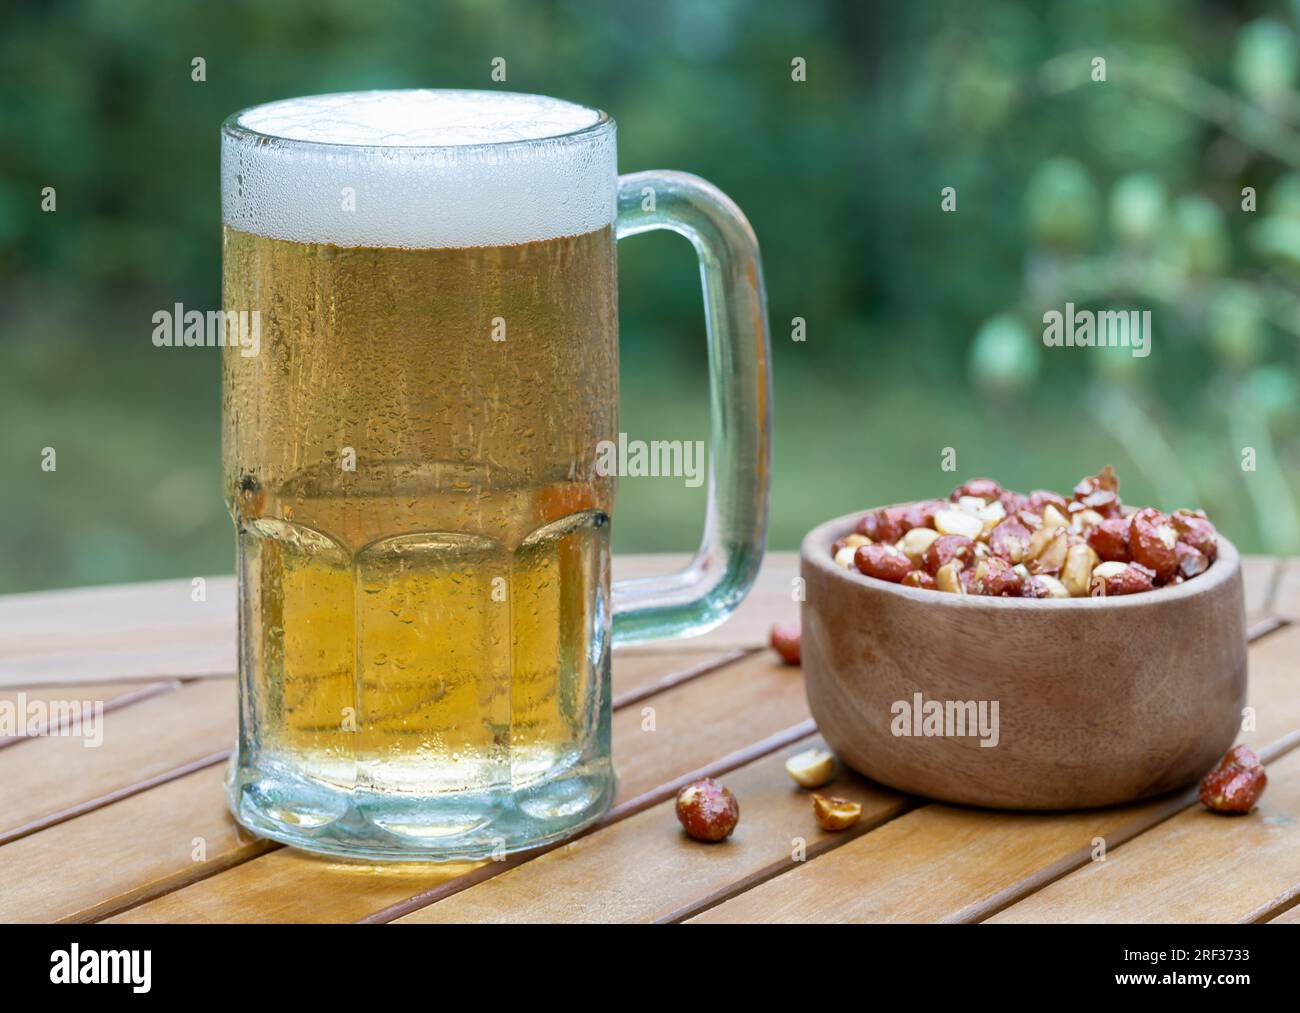 Glass mug of beer and bowl of nuts outdoors on wooden patio table with nature background Stock Photo